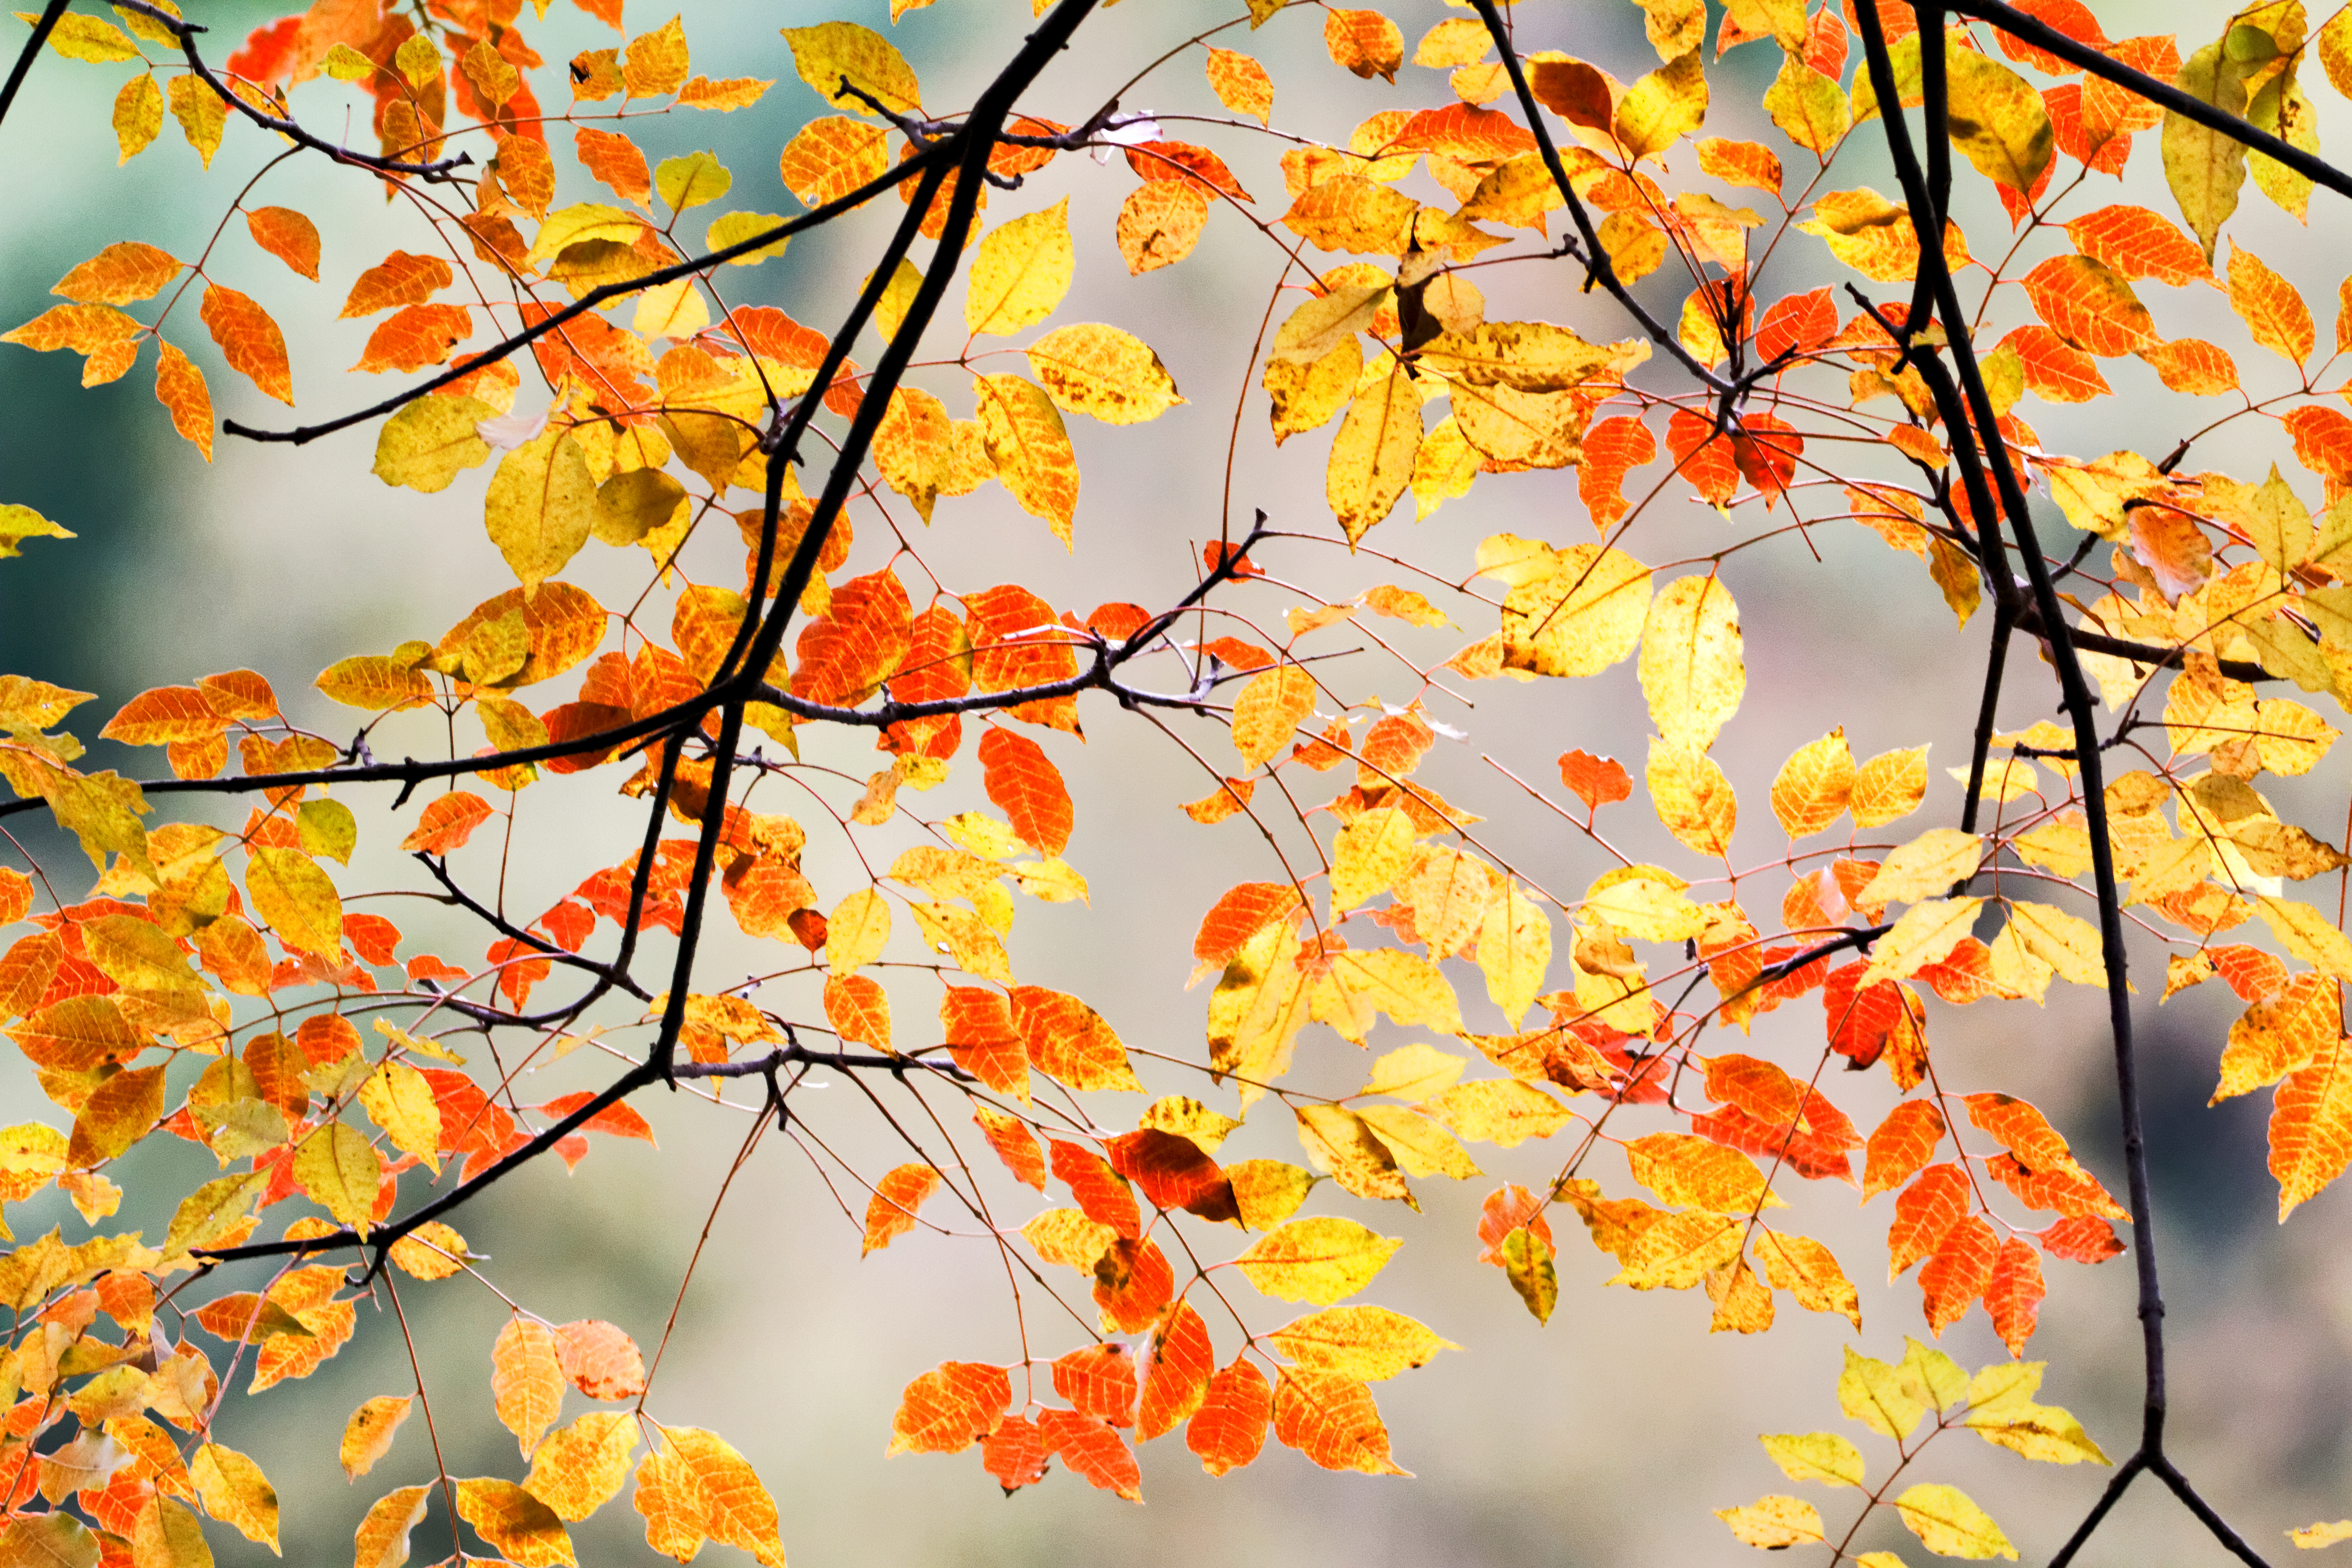 150753 free wallpaper 540x960 for phone, download images autumn, branches, macro, nature 540x960 for mobile